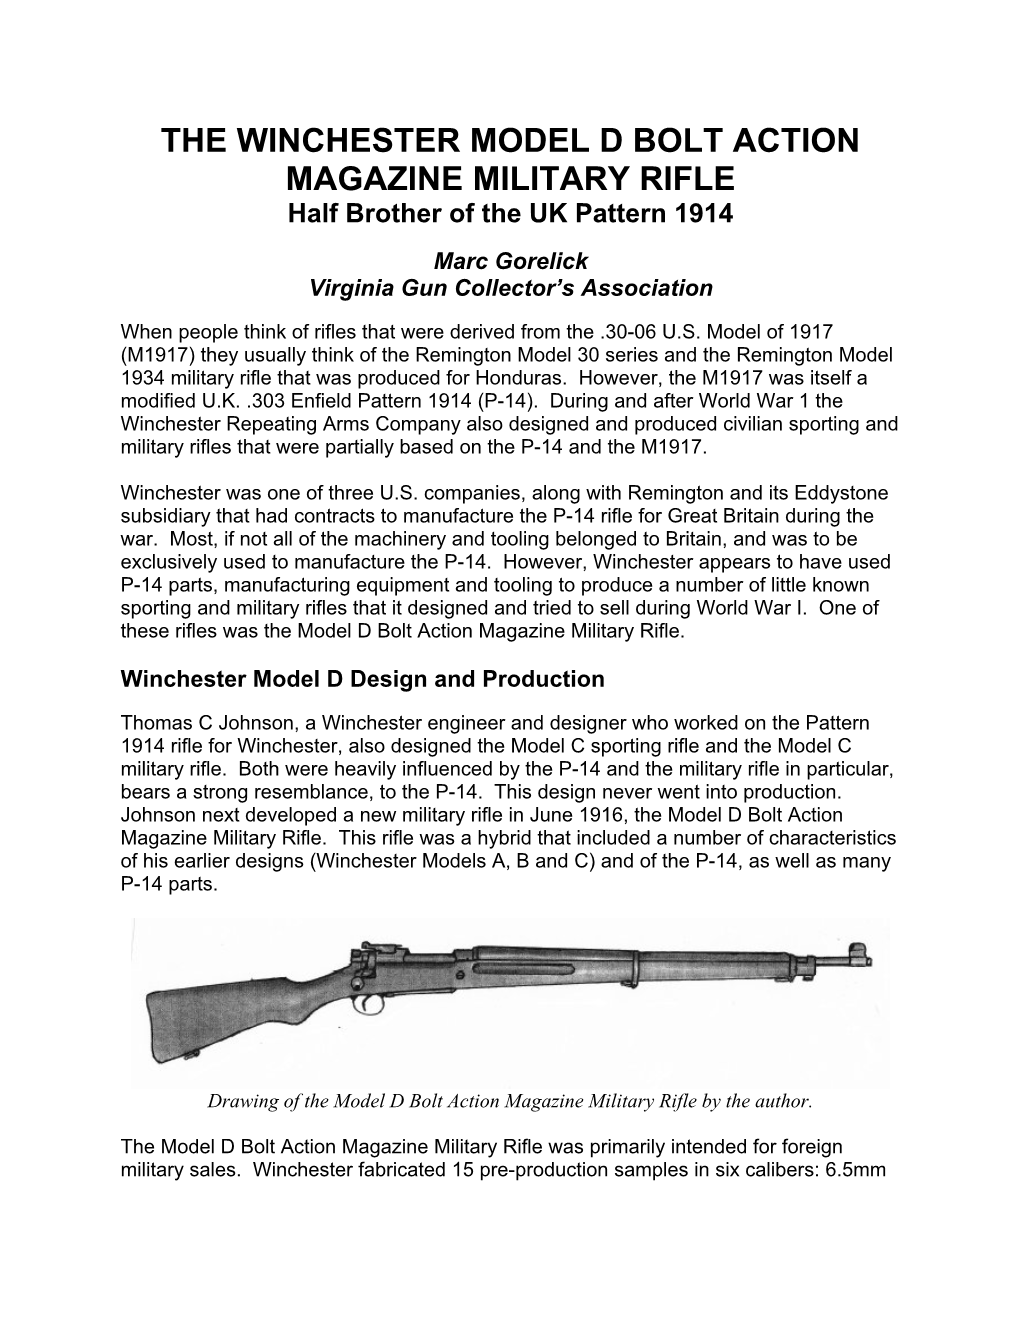 Winchester Model D Military Rifle